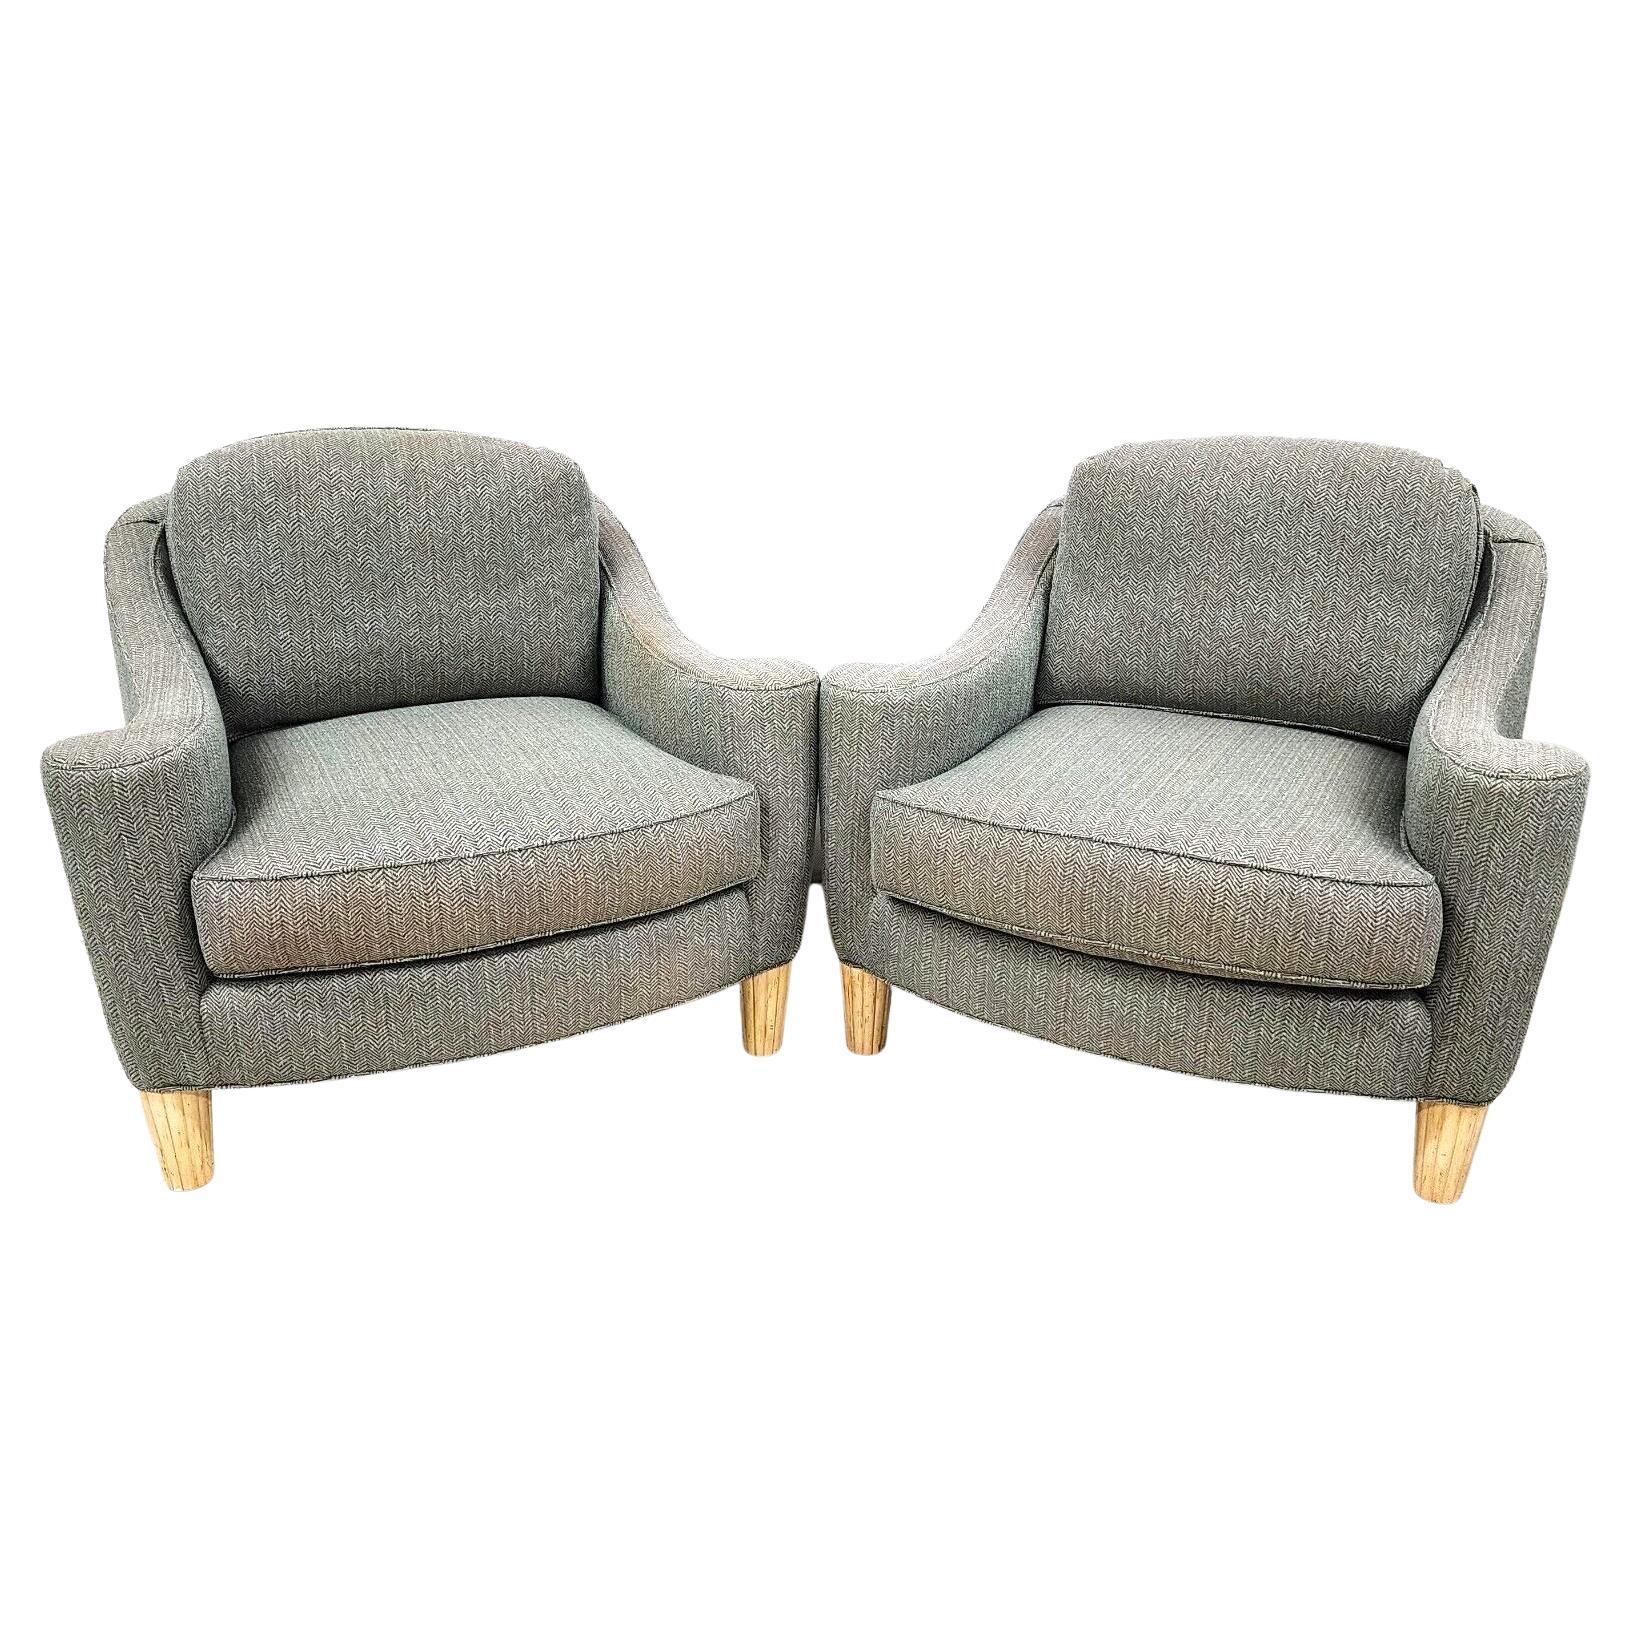 Pair of Modern Contemporary Club Chairs by Pearson